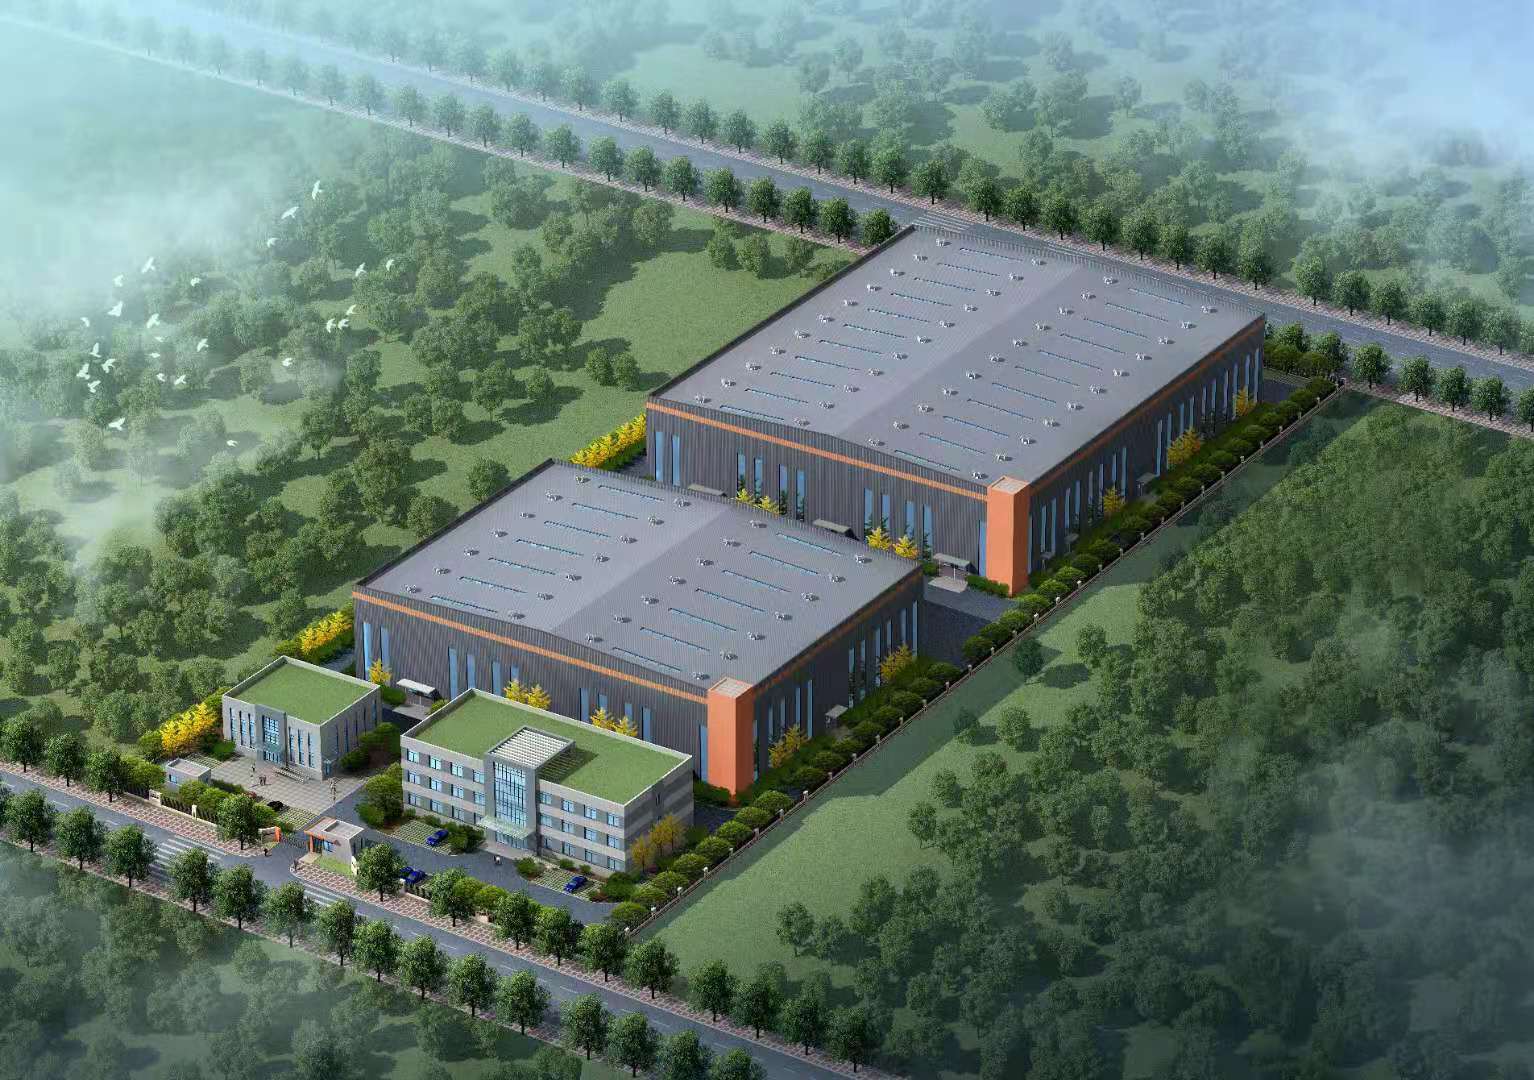 Ceremony of construction for Aipu new factory